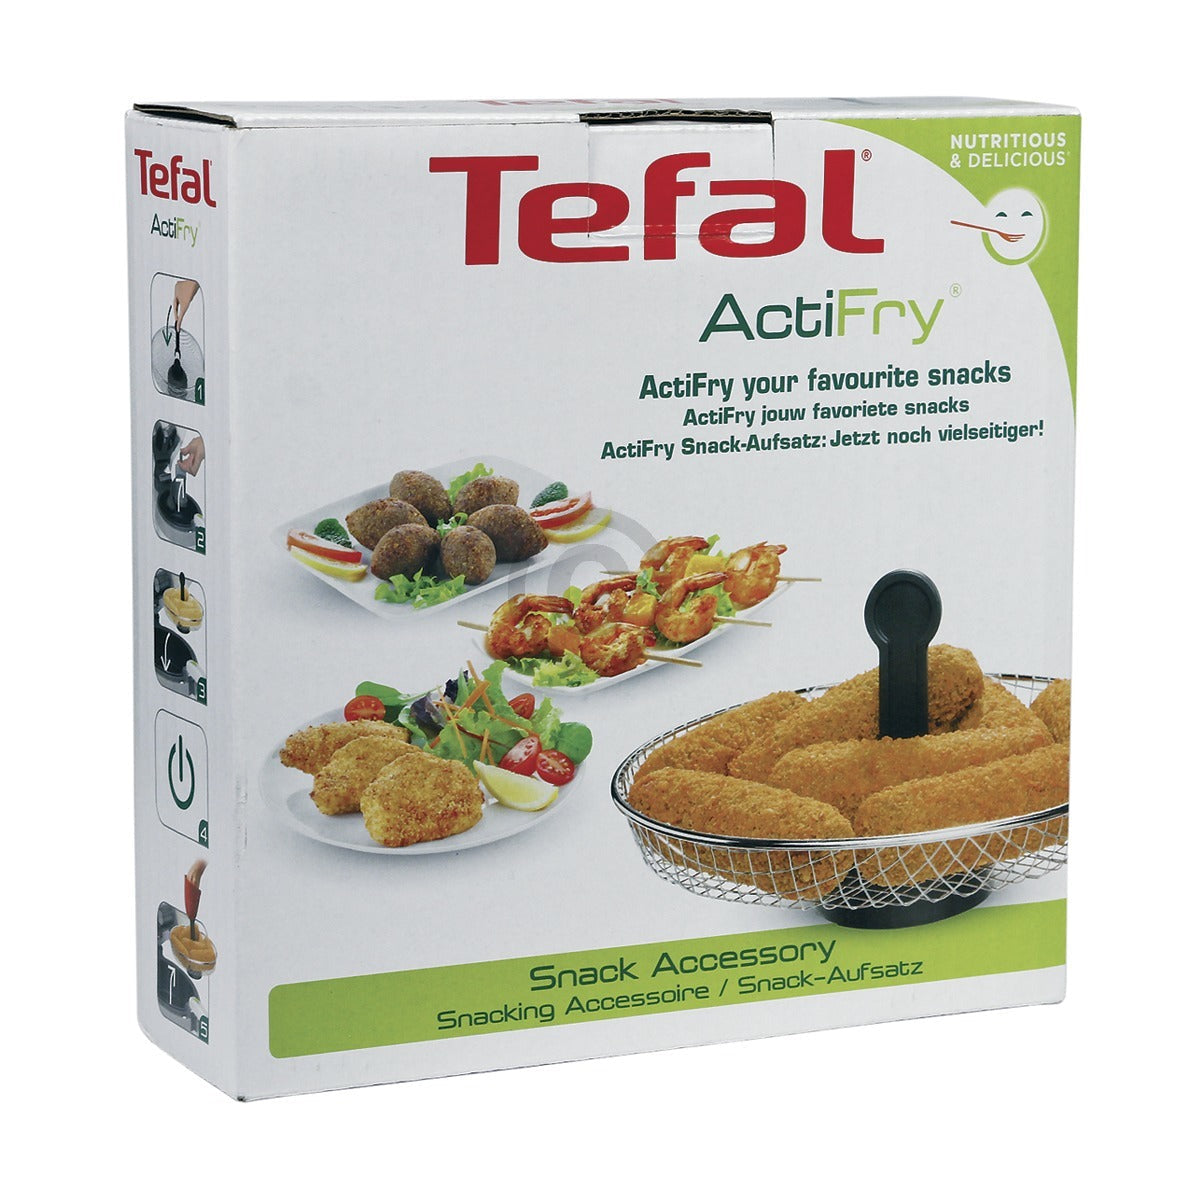 Fritteuse Tefal of Basket Snack GH806015 ActiFry